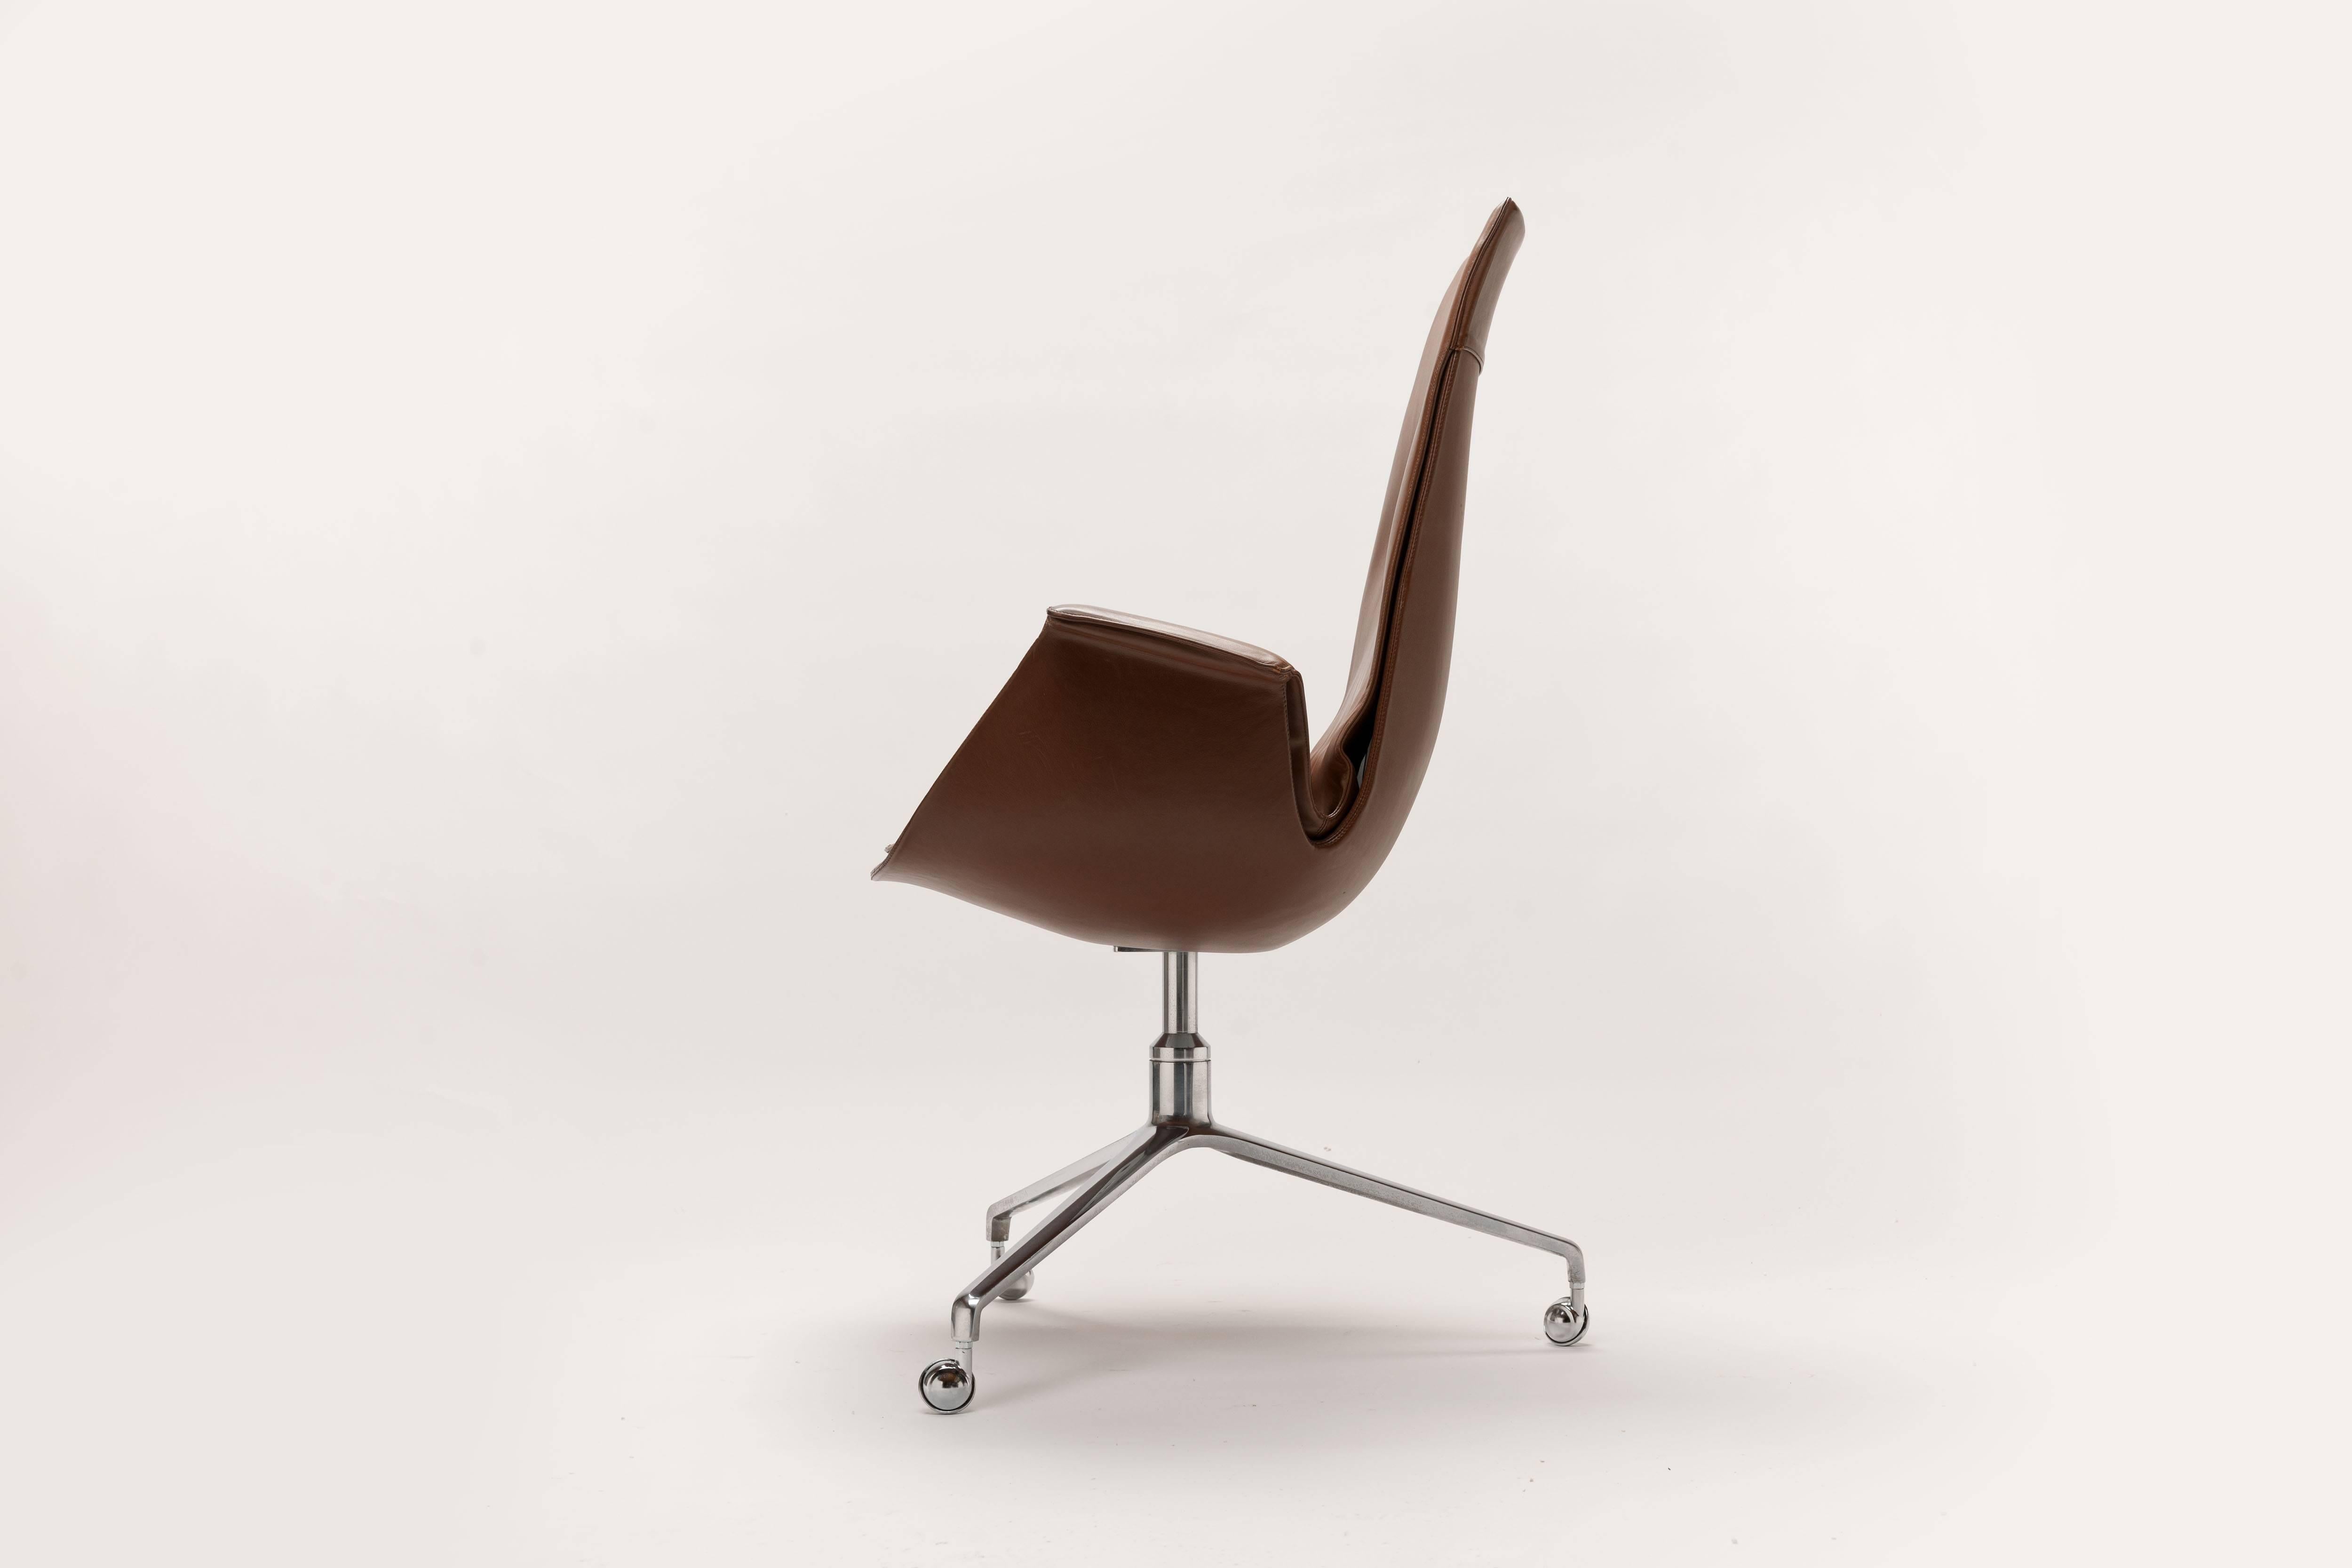 Beautiful original brown leather swiveling high back desk chair by Preben Fabricius & Jorgen Kastholm on signature tripod cast aluminium base with castors.
This is the original and first execution with the three legged base and metal castors.